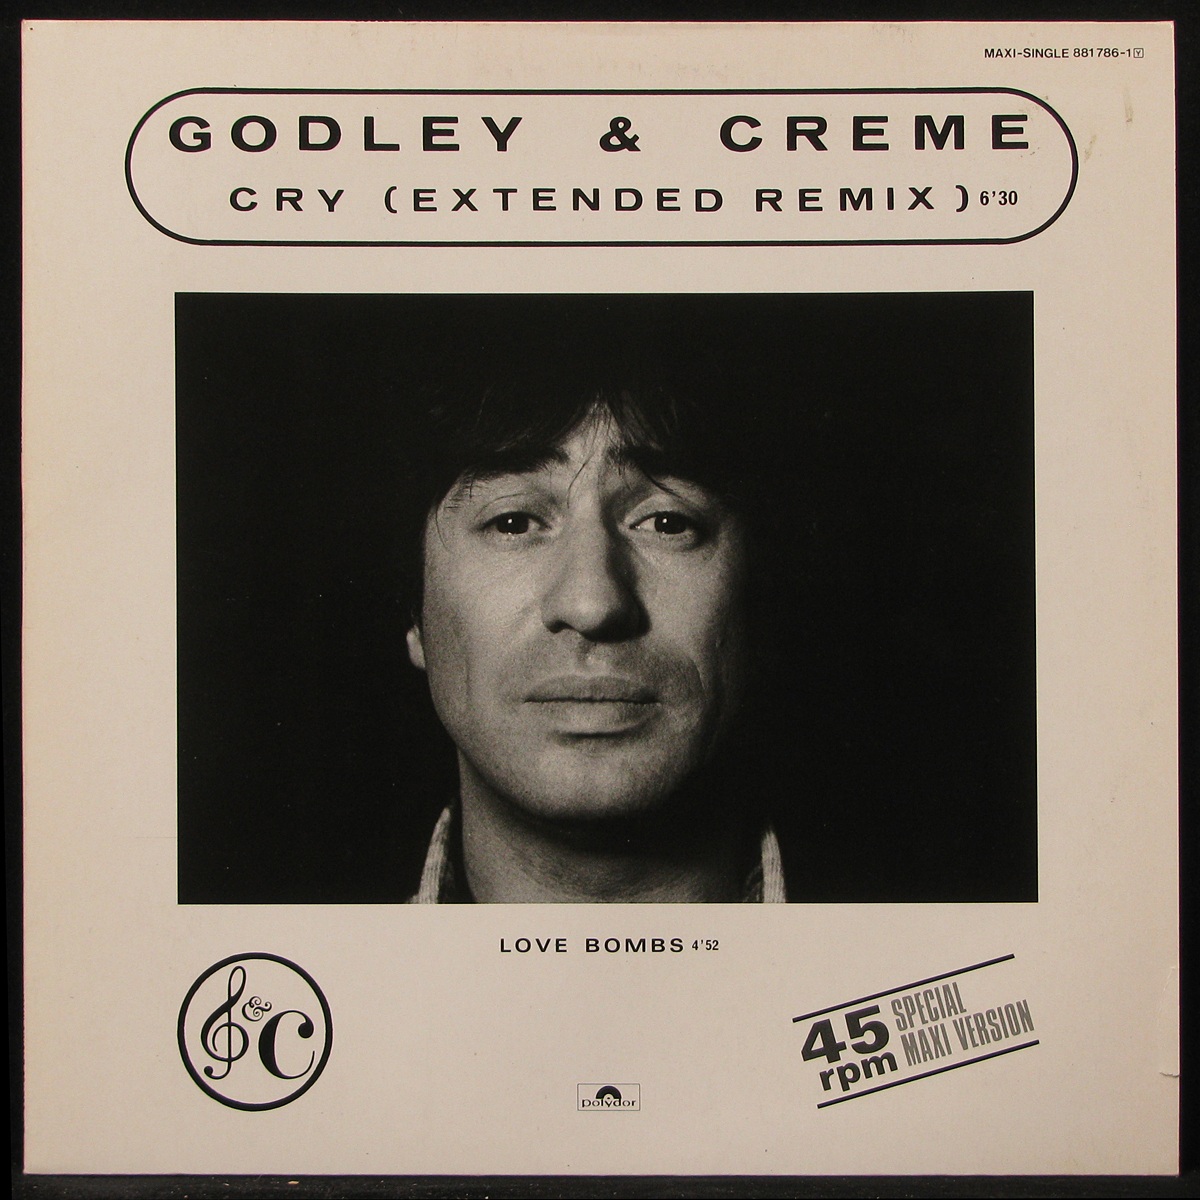 LP Godley & Creme — Cry (Extended Remix) (maxi) фото